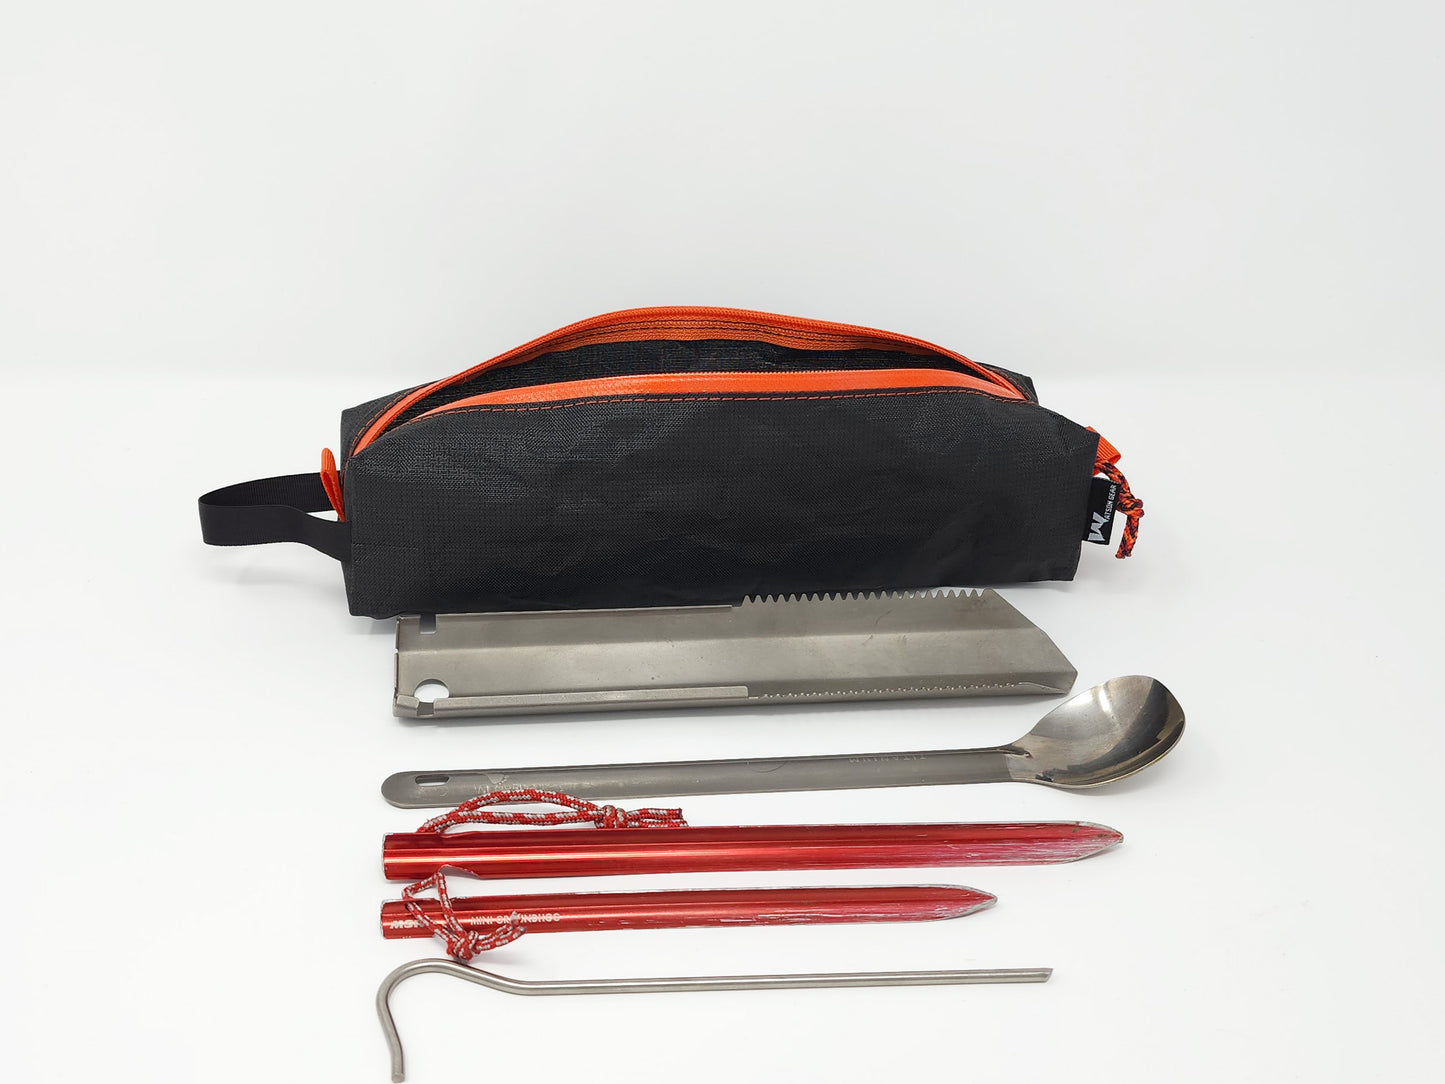 New! Pencil Storage Case, Ultra 200, Extremely tough material